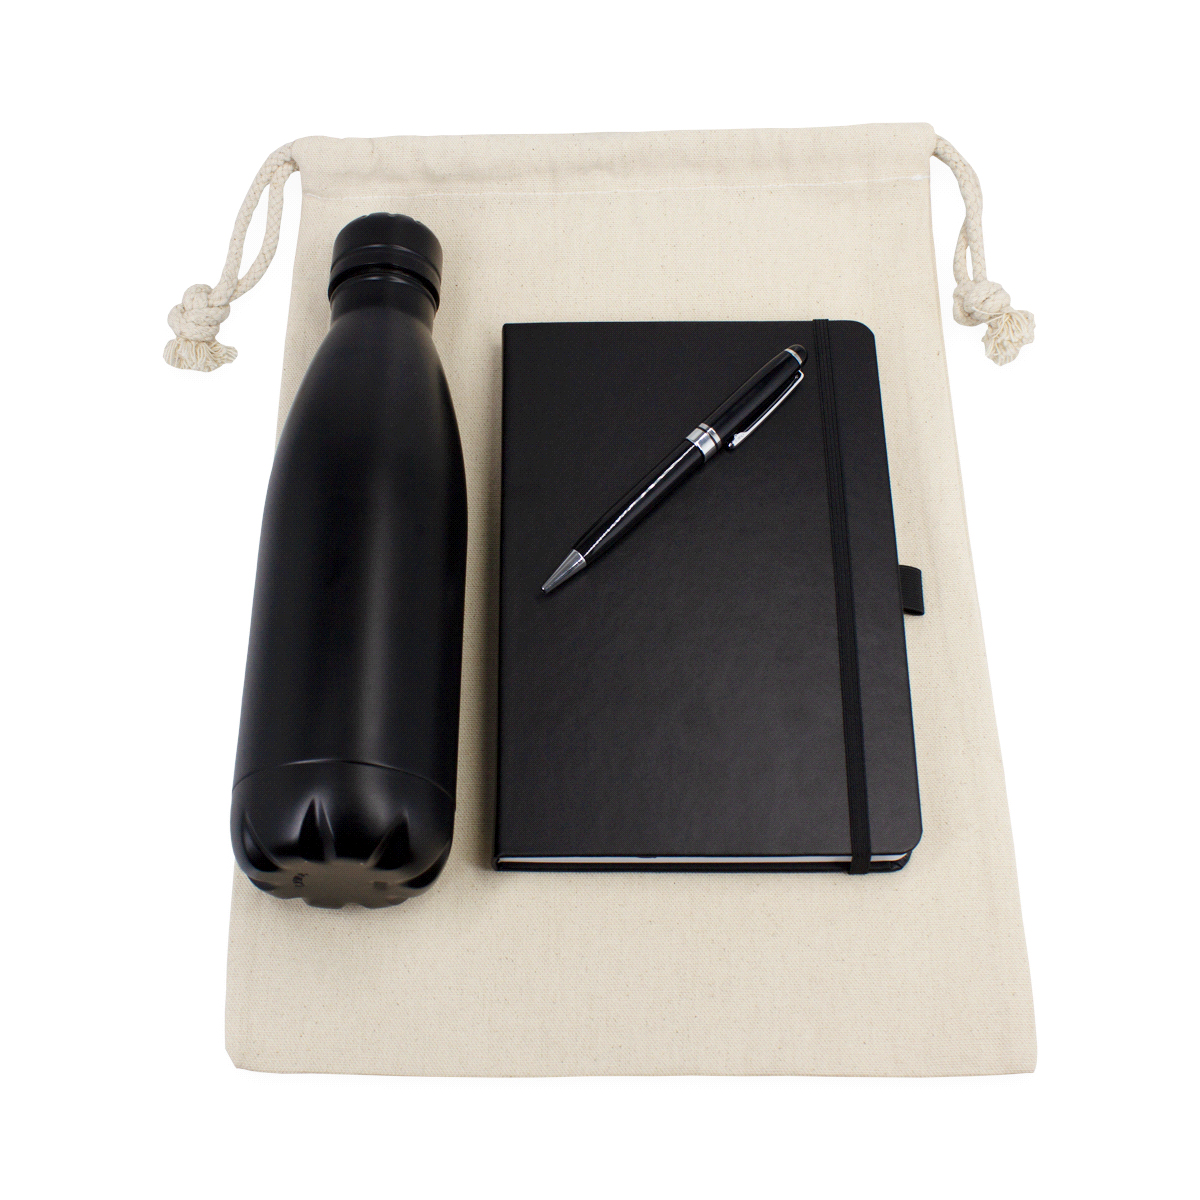 elevate journal gift set with pen, water bottle and carry bag